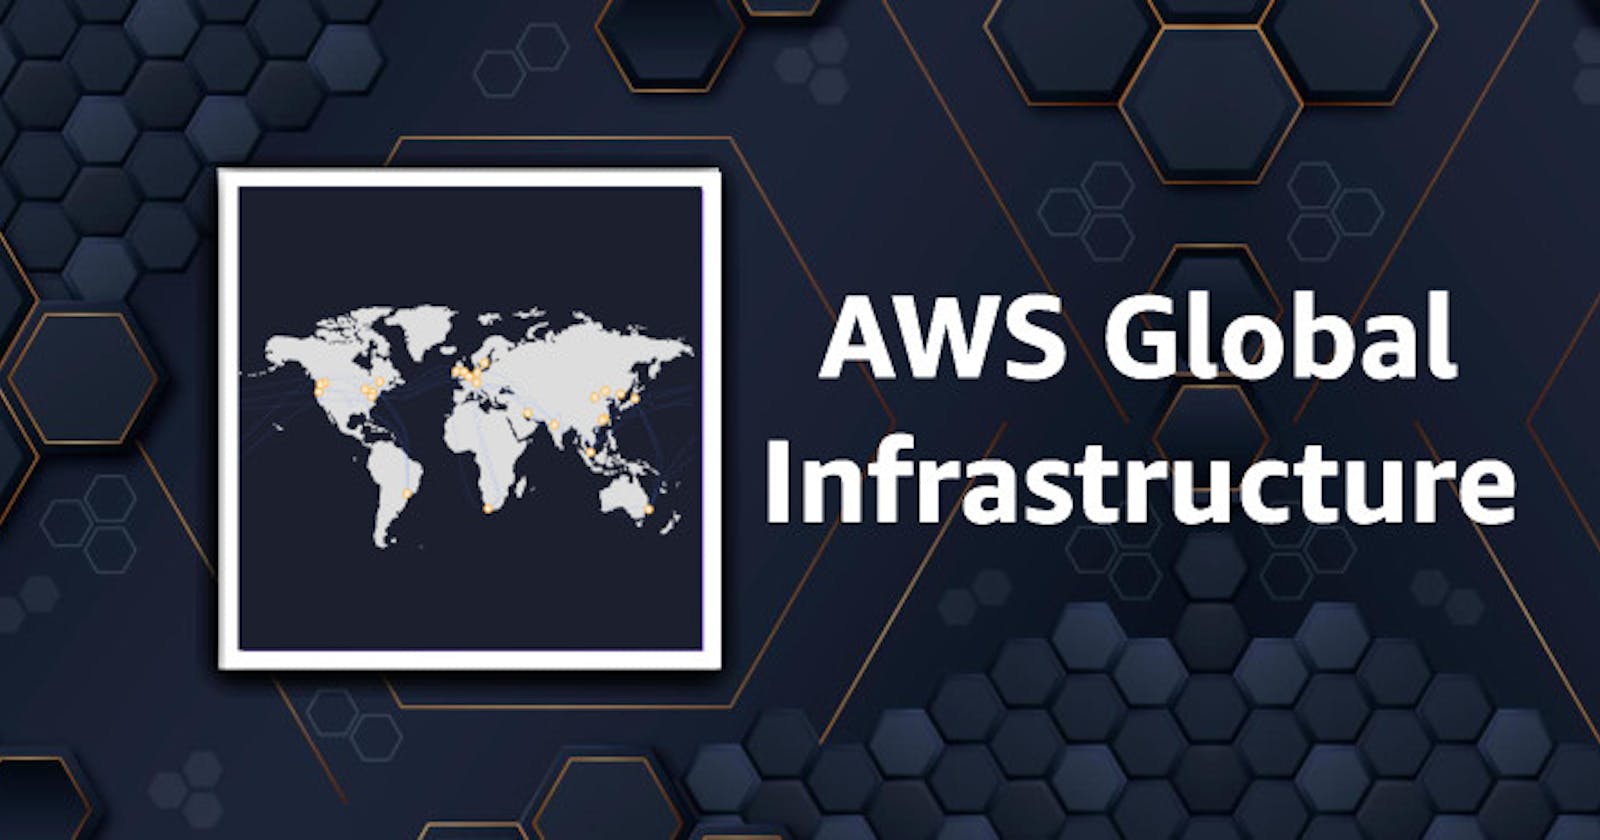 All you need to know about AWS Global Infrastructure